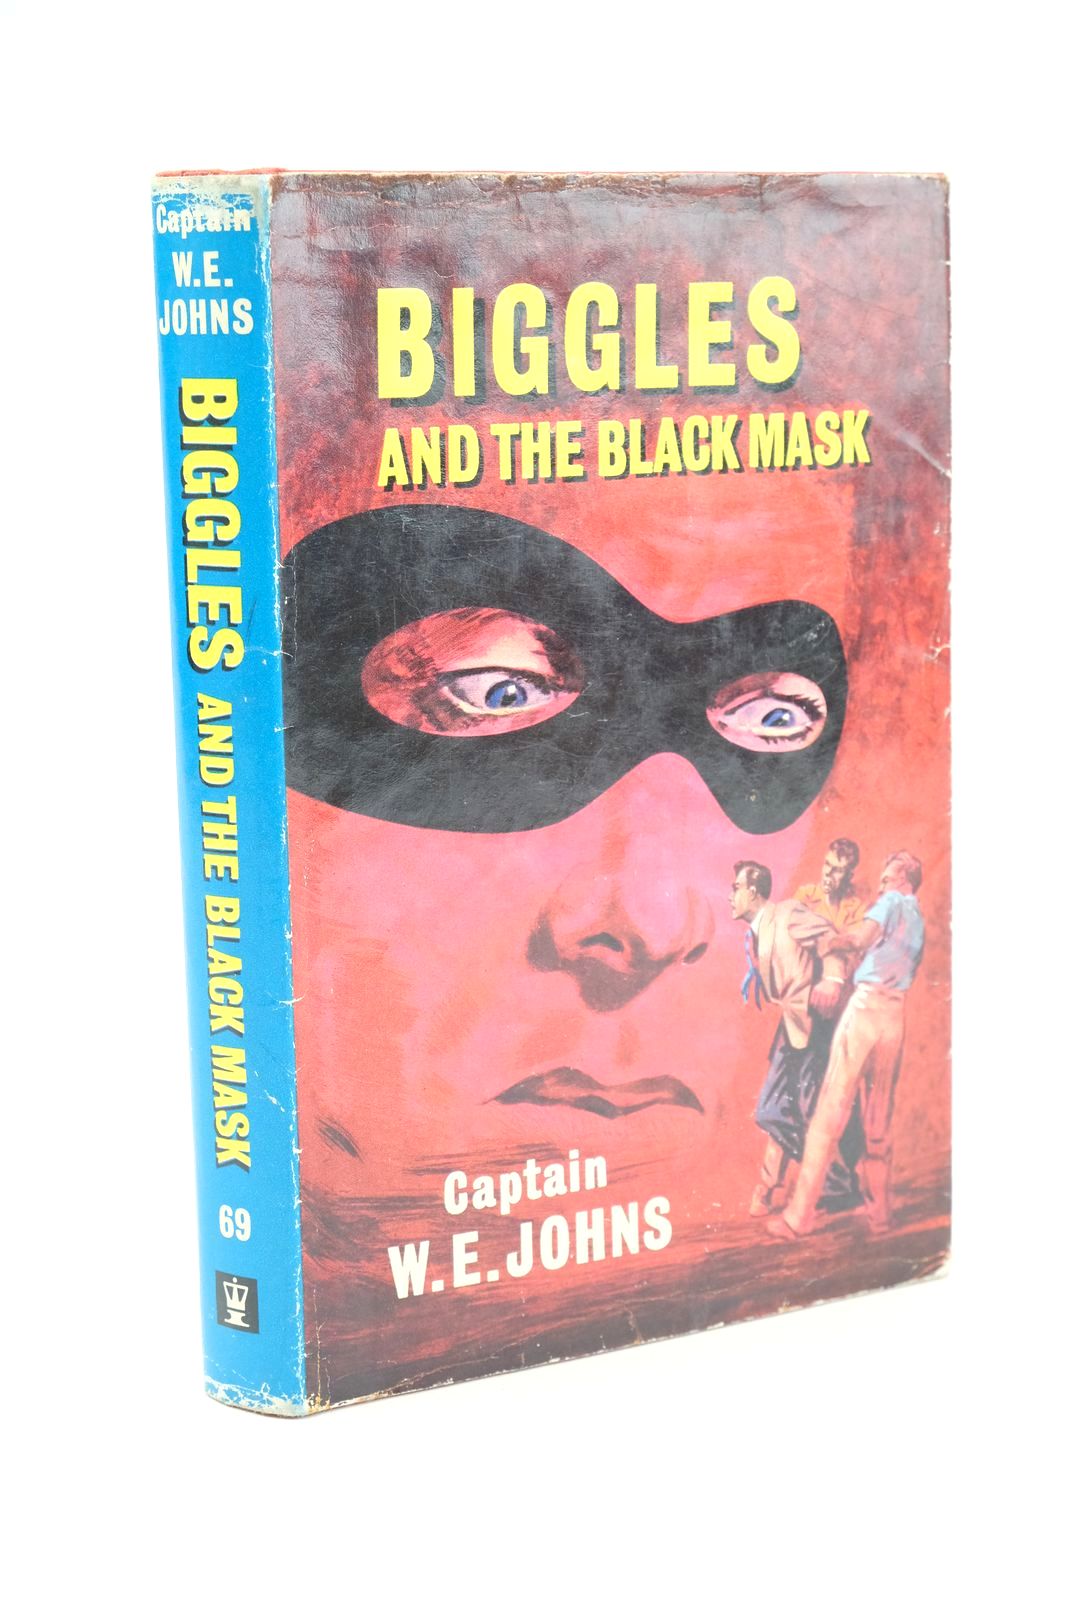 Photo of BIGGLES AND THE BLACK MASK written by Johns, W.E. illustrated by Stead,  published by Hodder &amp; Stoughton (STOCK CODE: 1323928)  for sale by Stella & Rose's Books